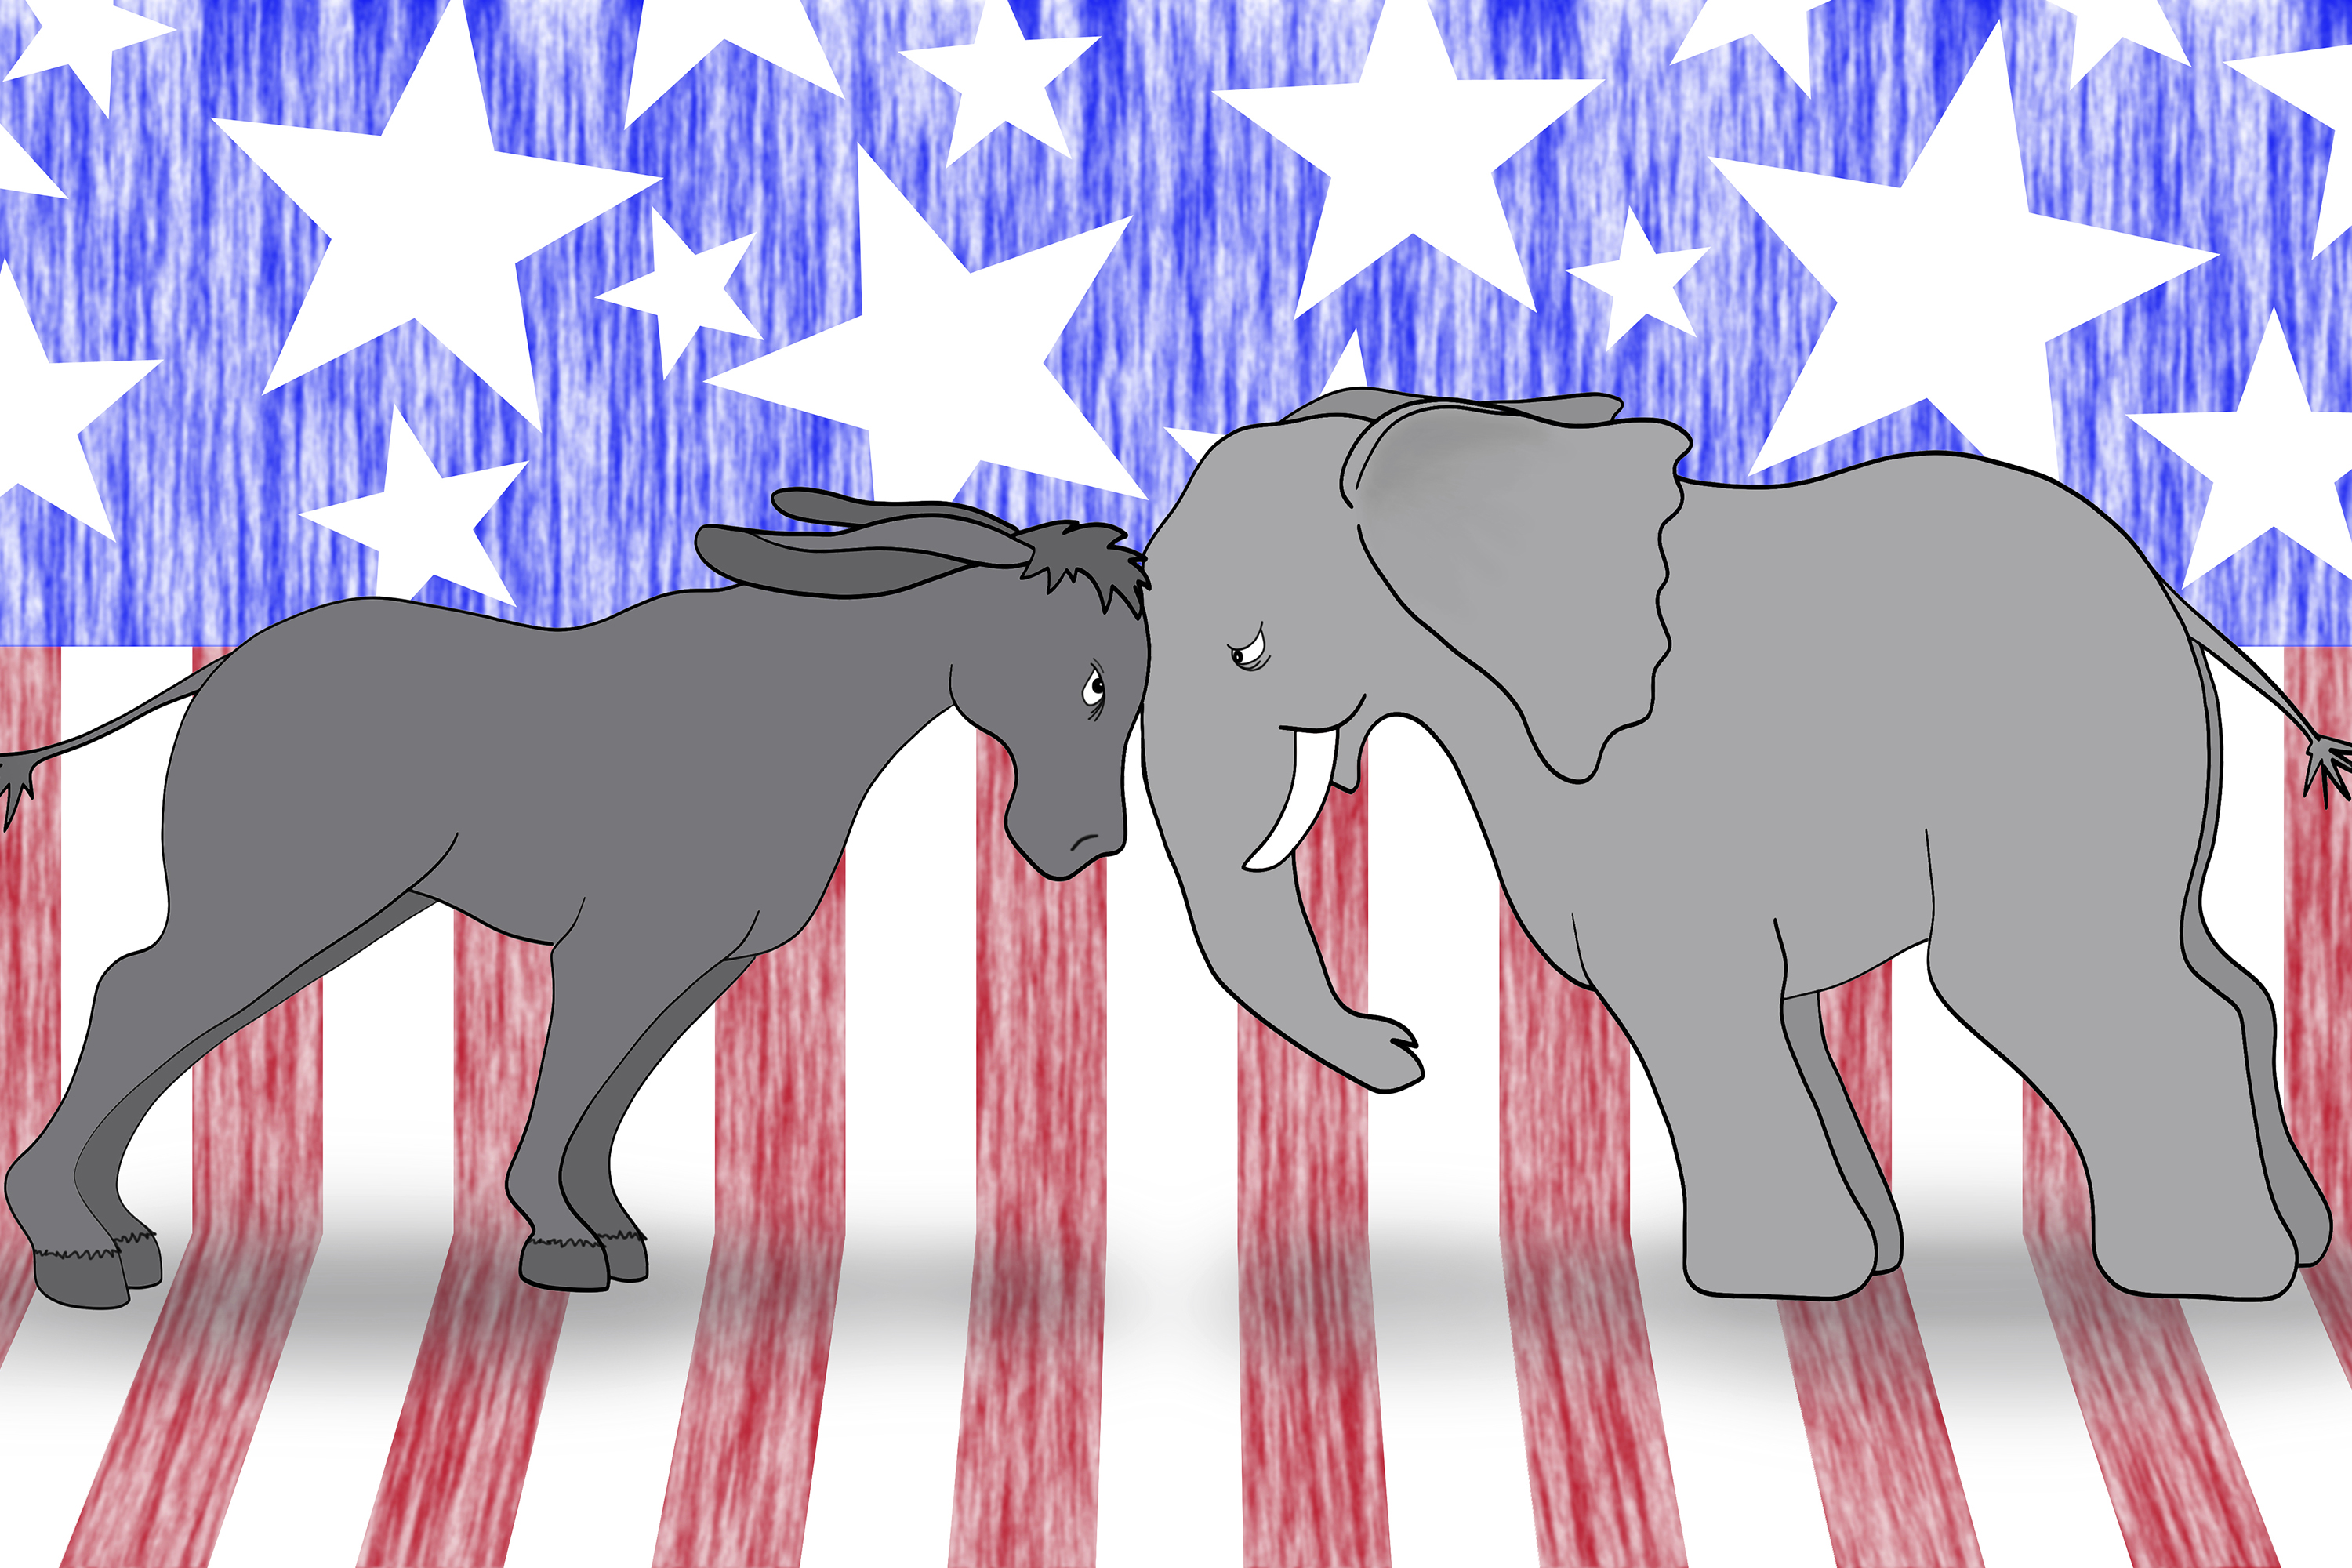 Cartoon depicting the two main U.S. political parties going head to head. (iStock Image)